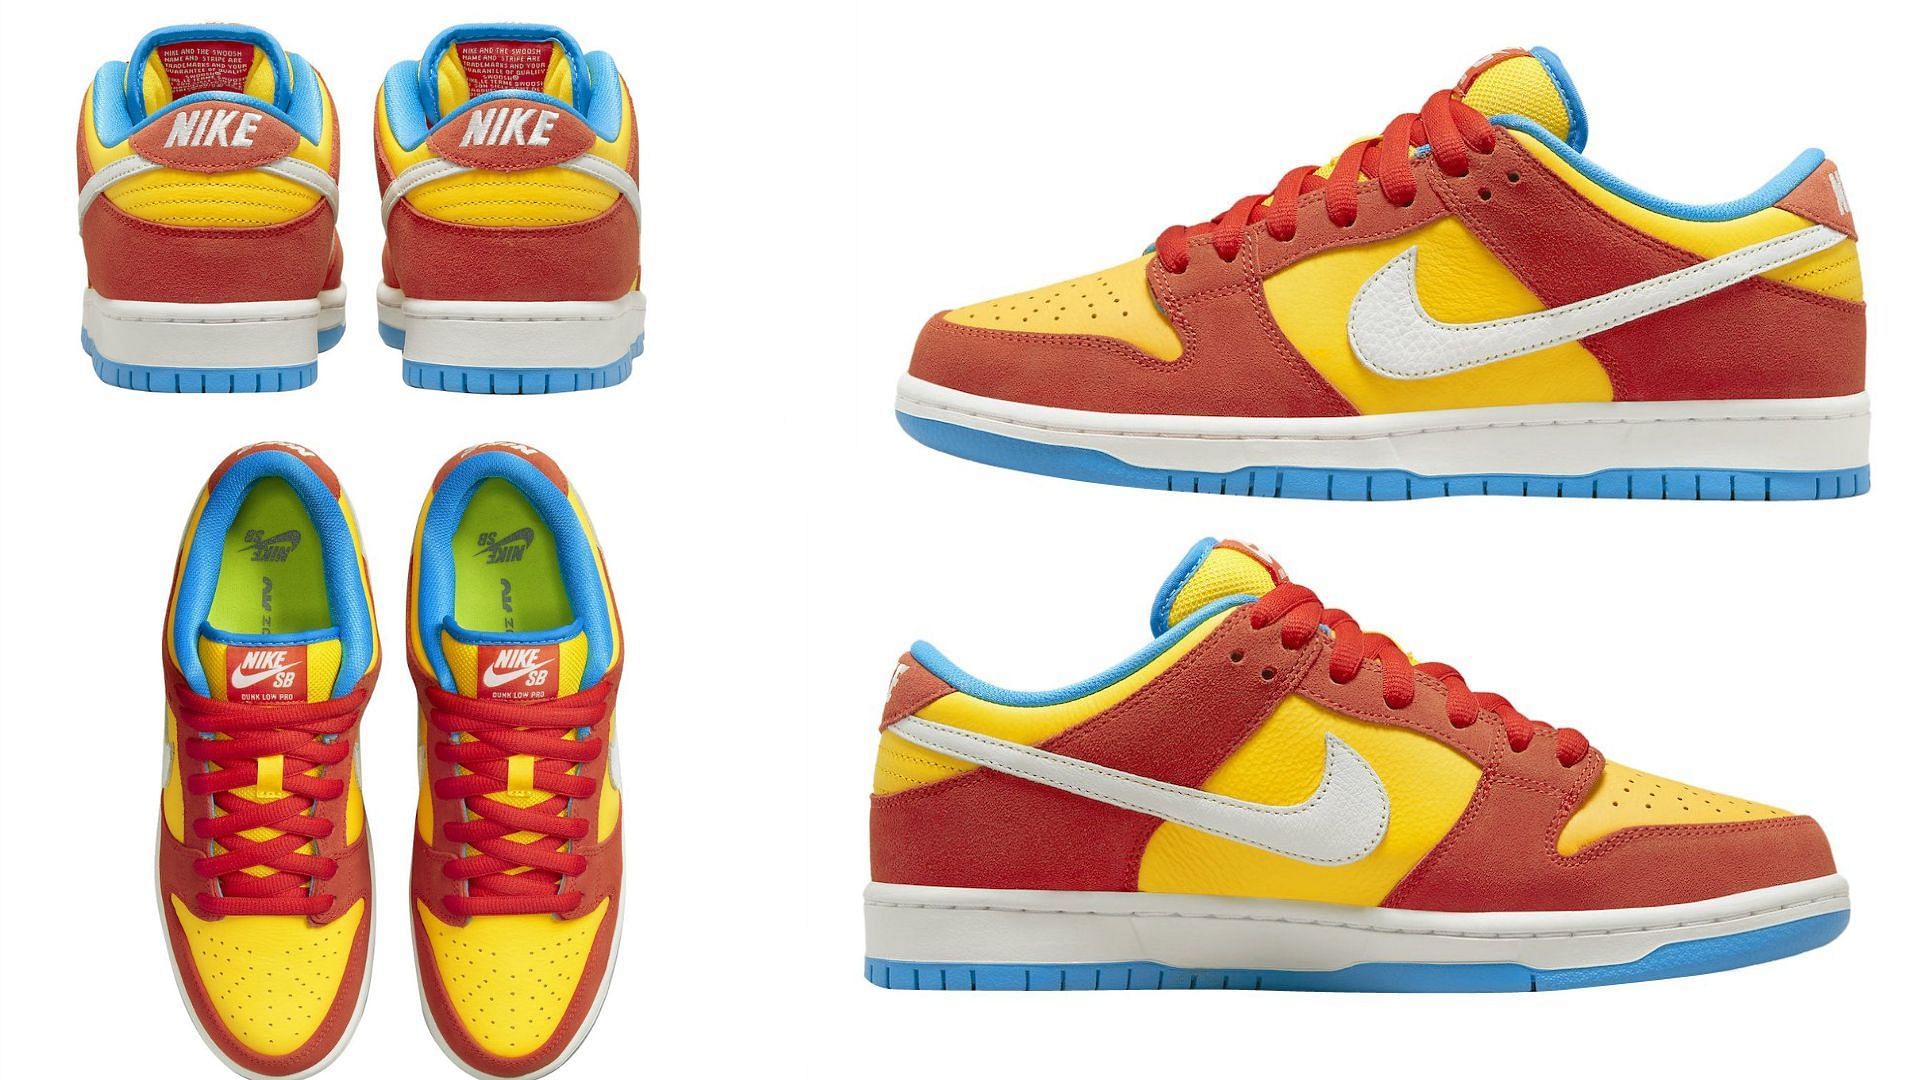 Nike&rsquo;s SB Dunk Low Bart Simpson is ready for release (Image via Sportskeeda)